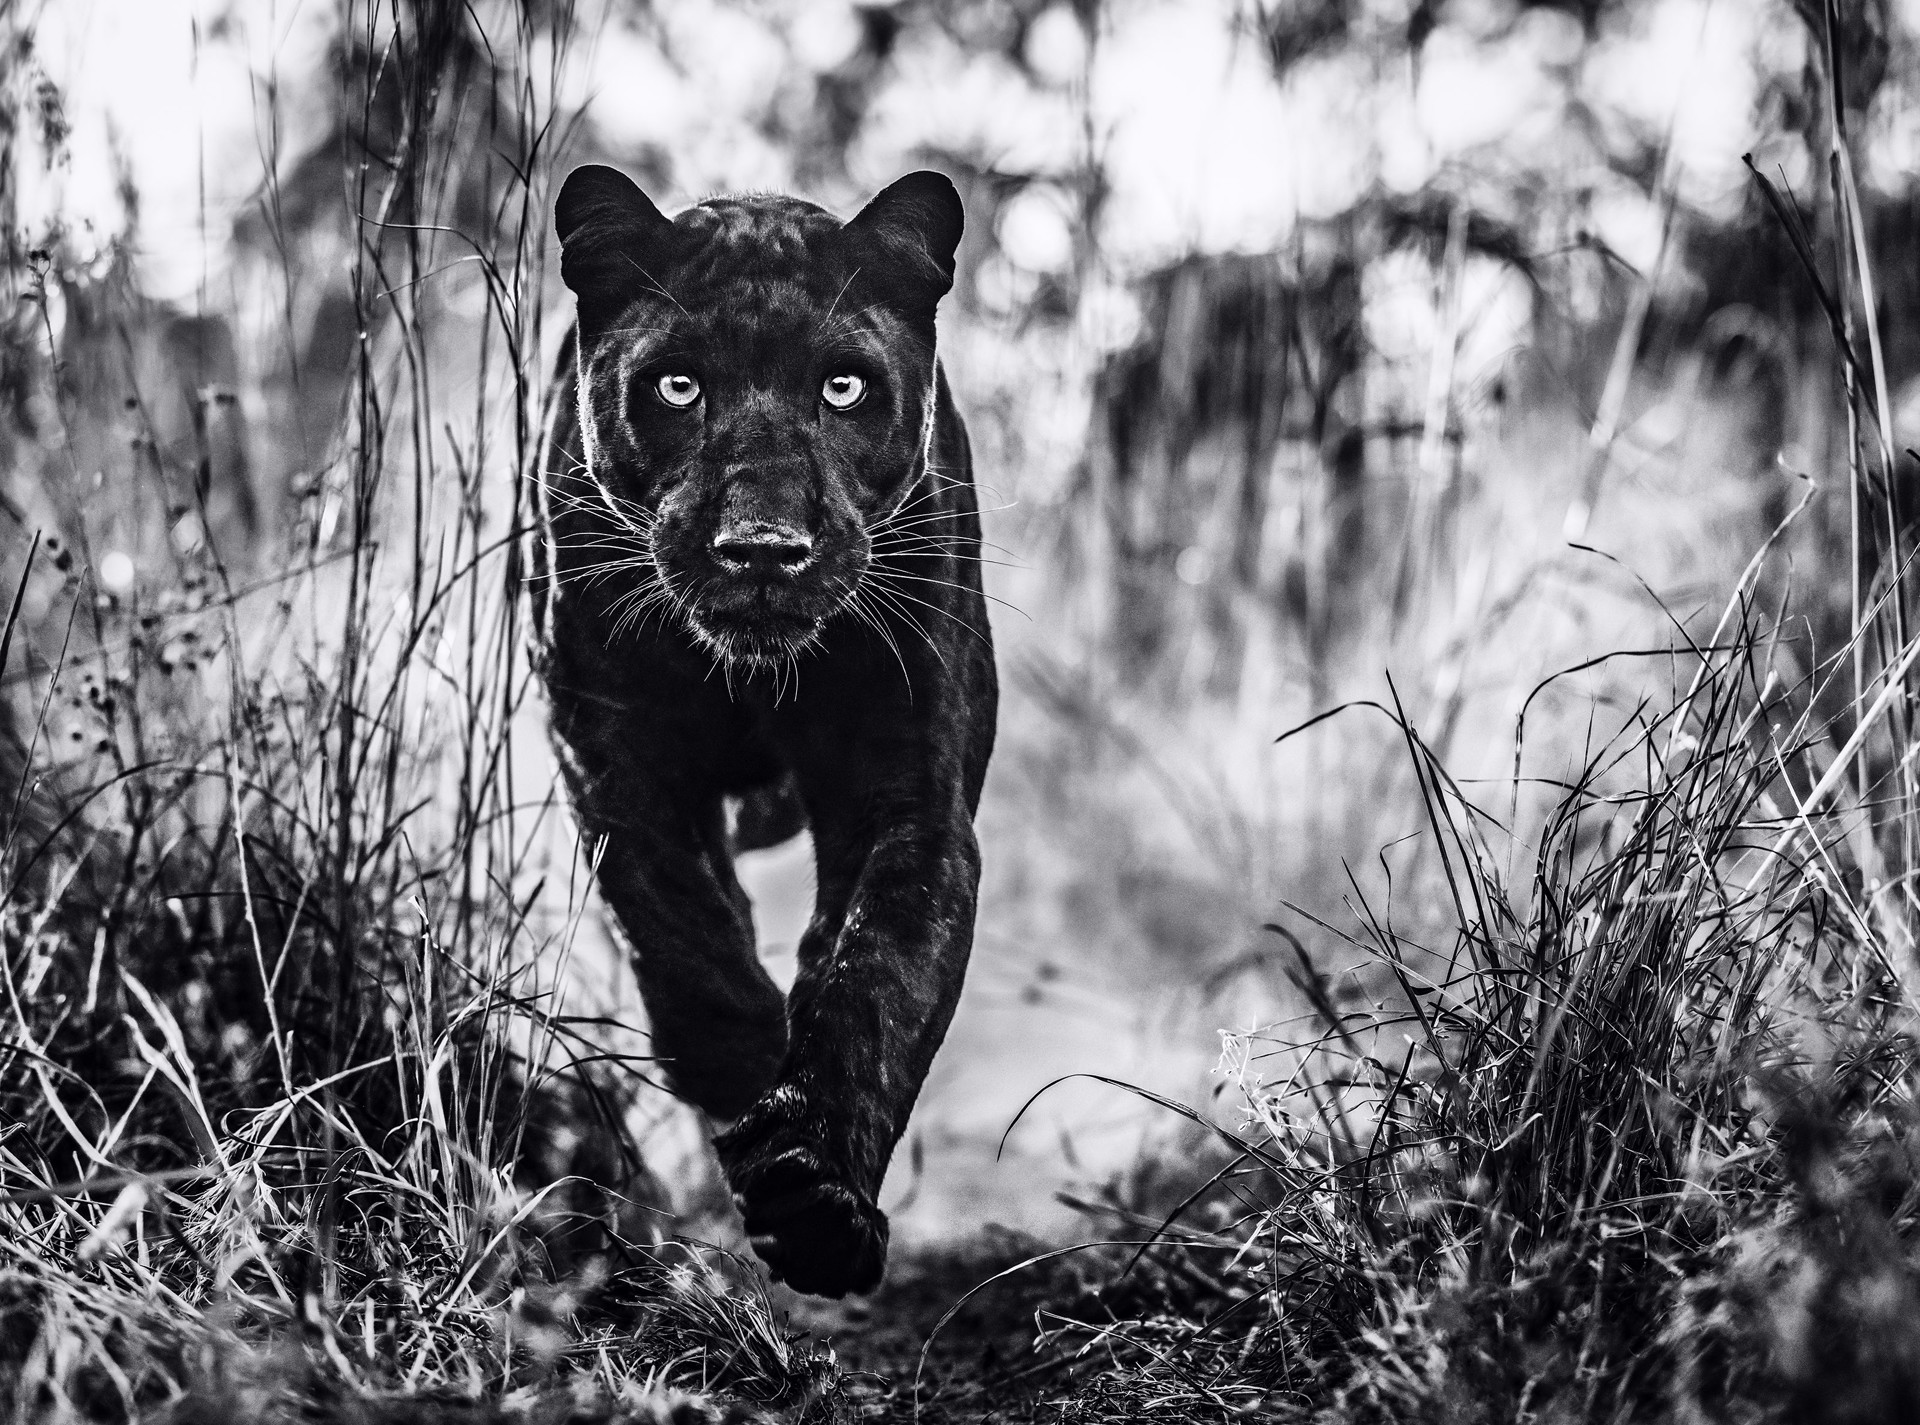 The Black Panther Returns by David Yarrow